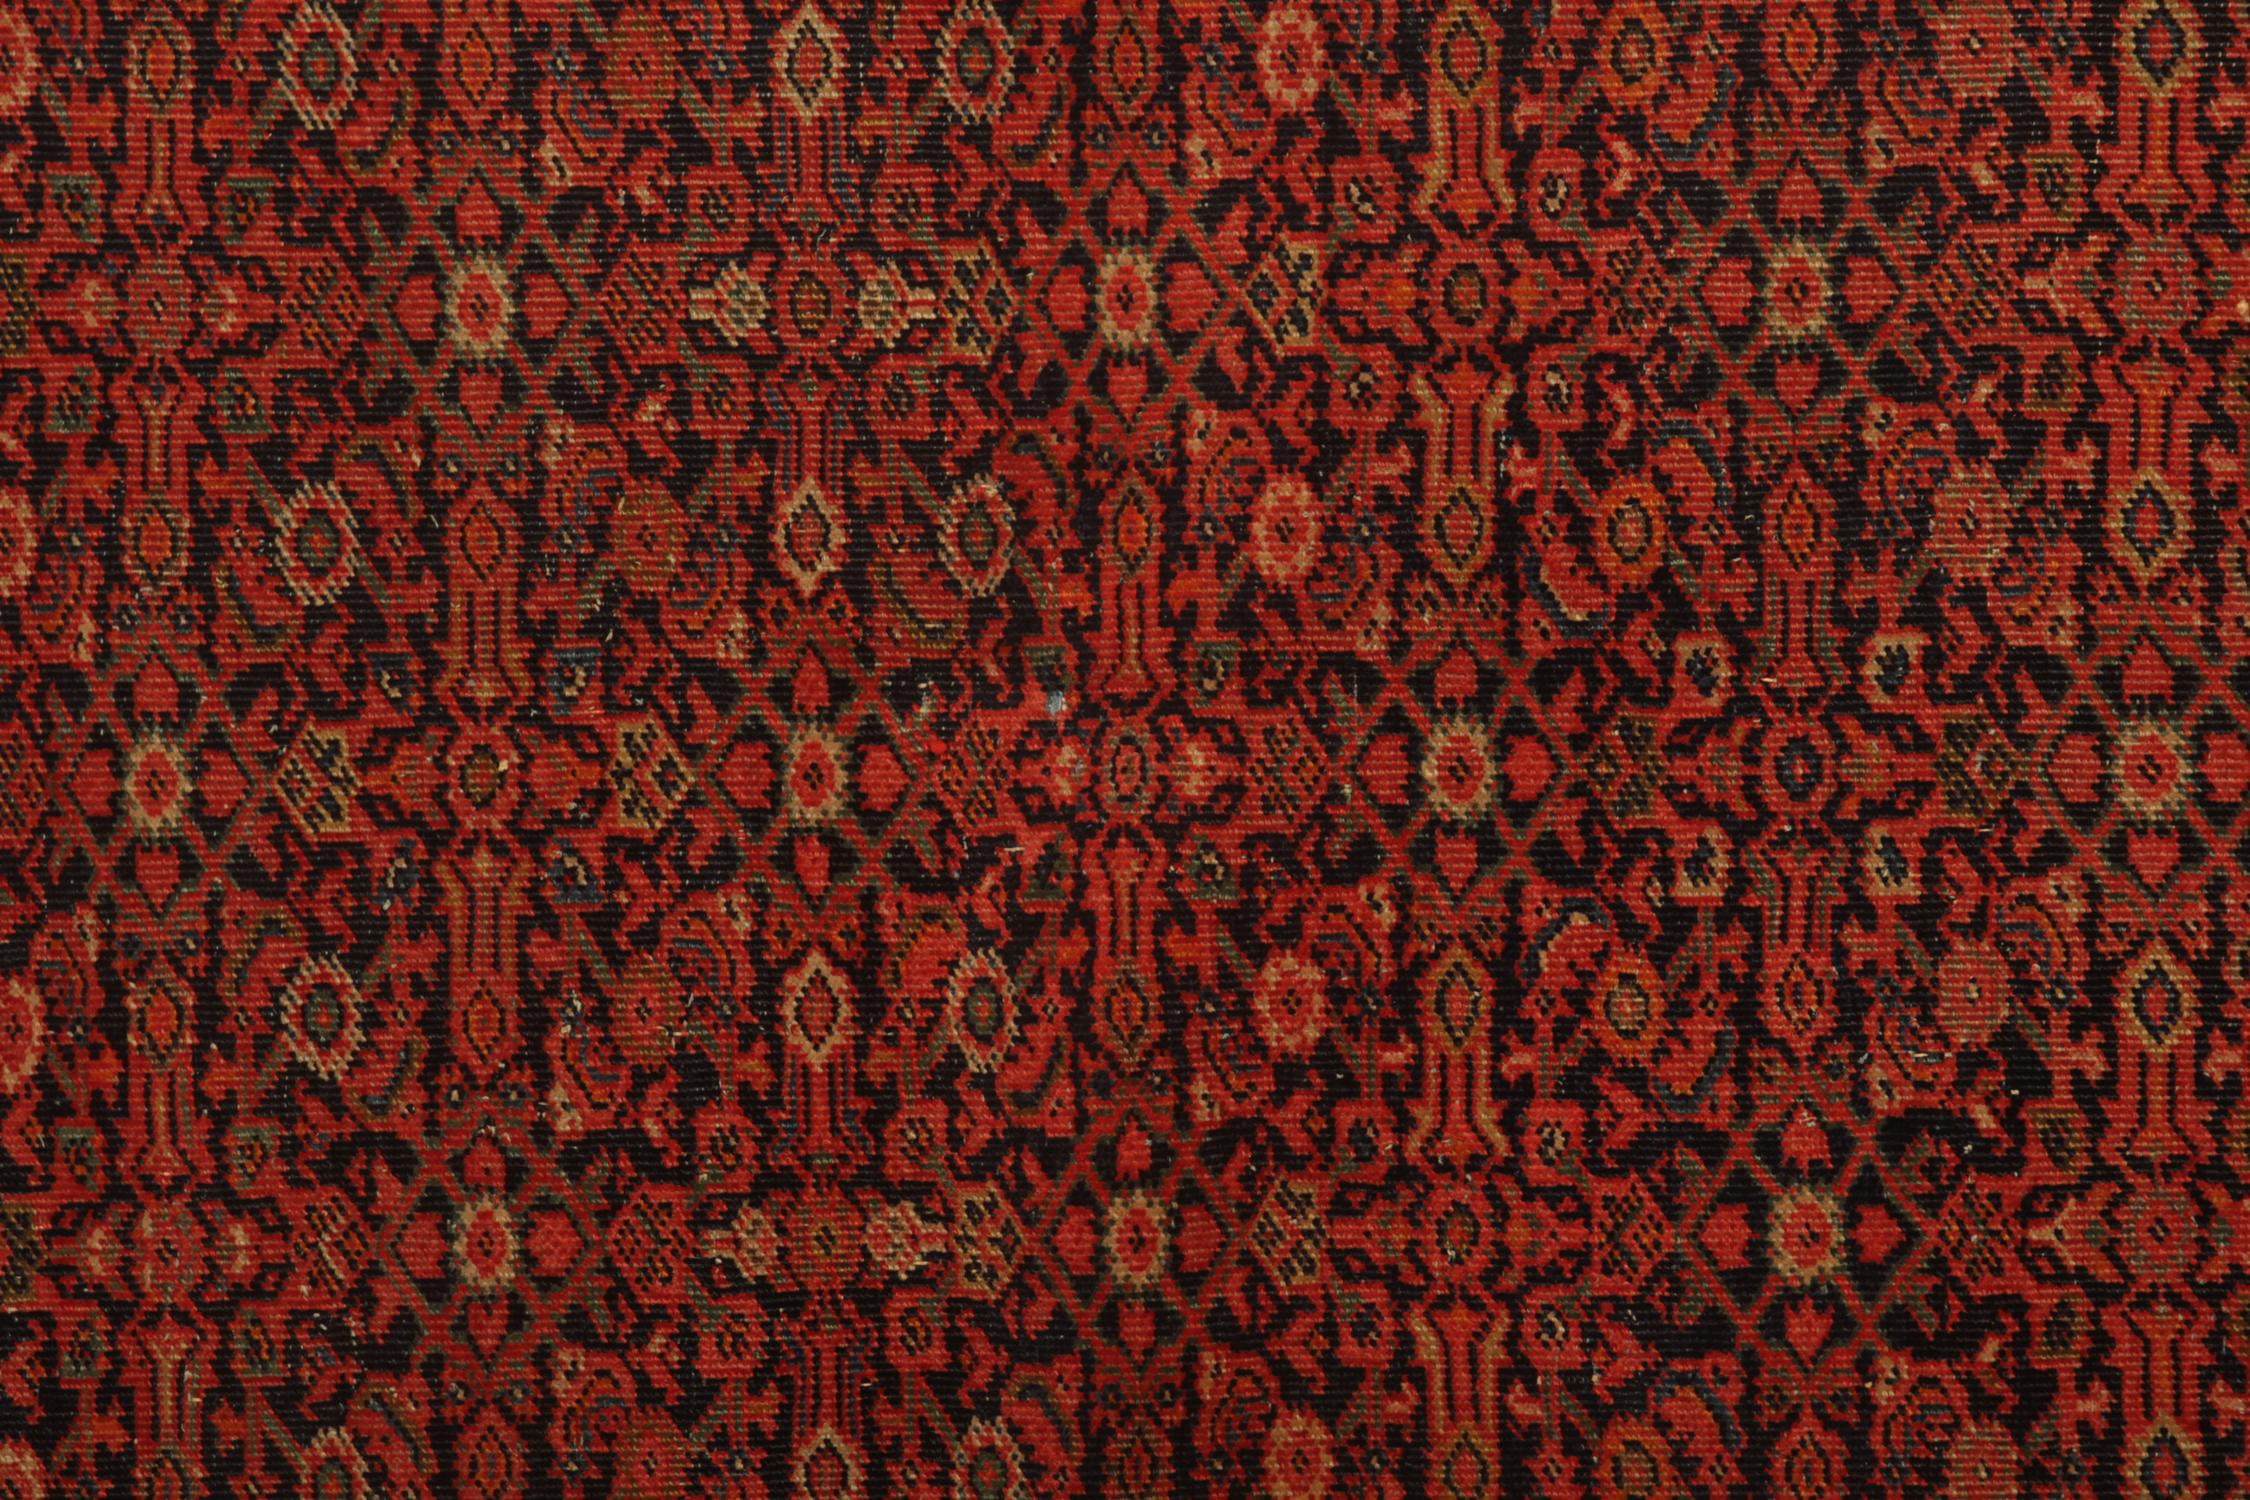 An all-over design drenches the centre of this rug in rich reds and orange tones. The corners have added details with a botanical design, then enclosed by a layered foliate border. 
This geometric rug has charming personal details, including zigzag